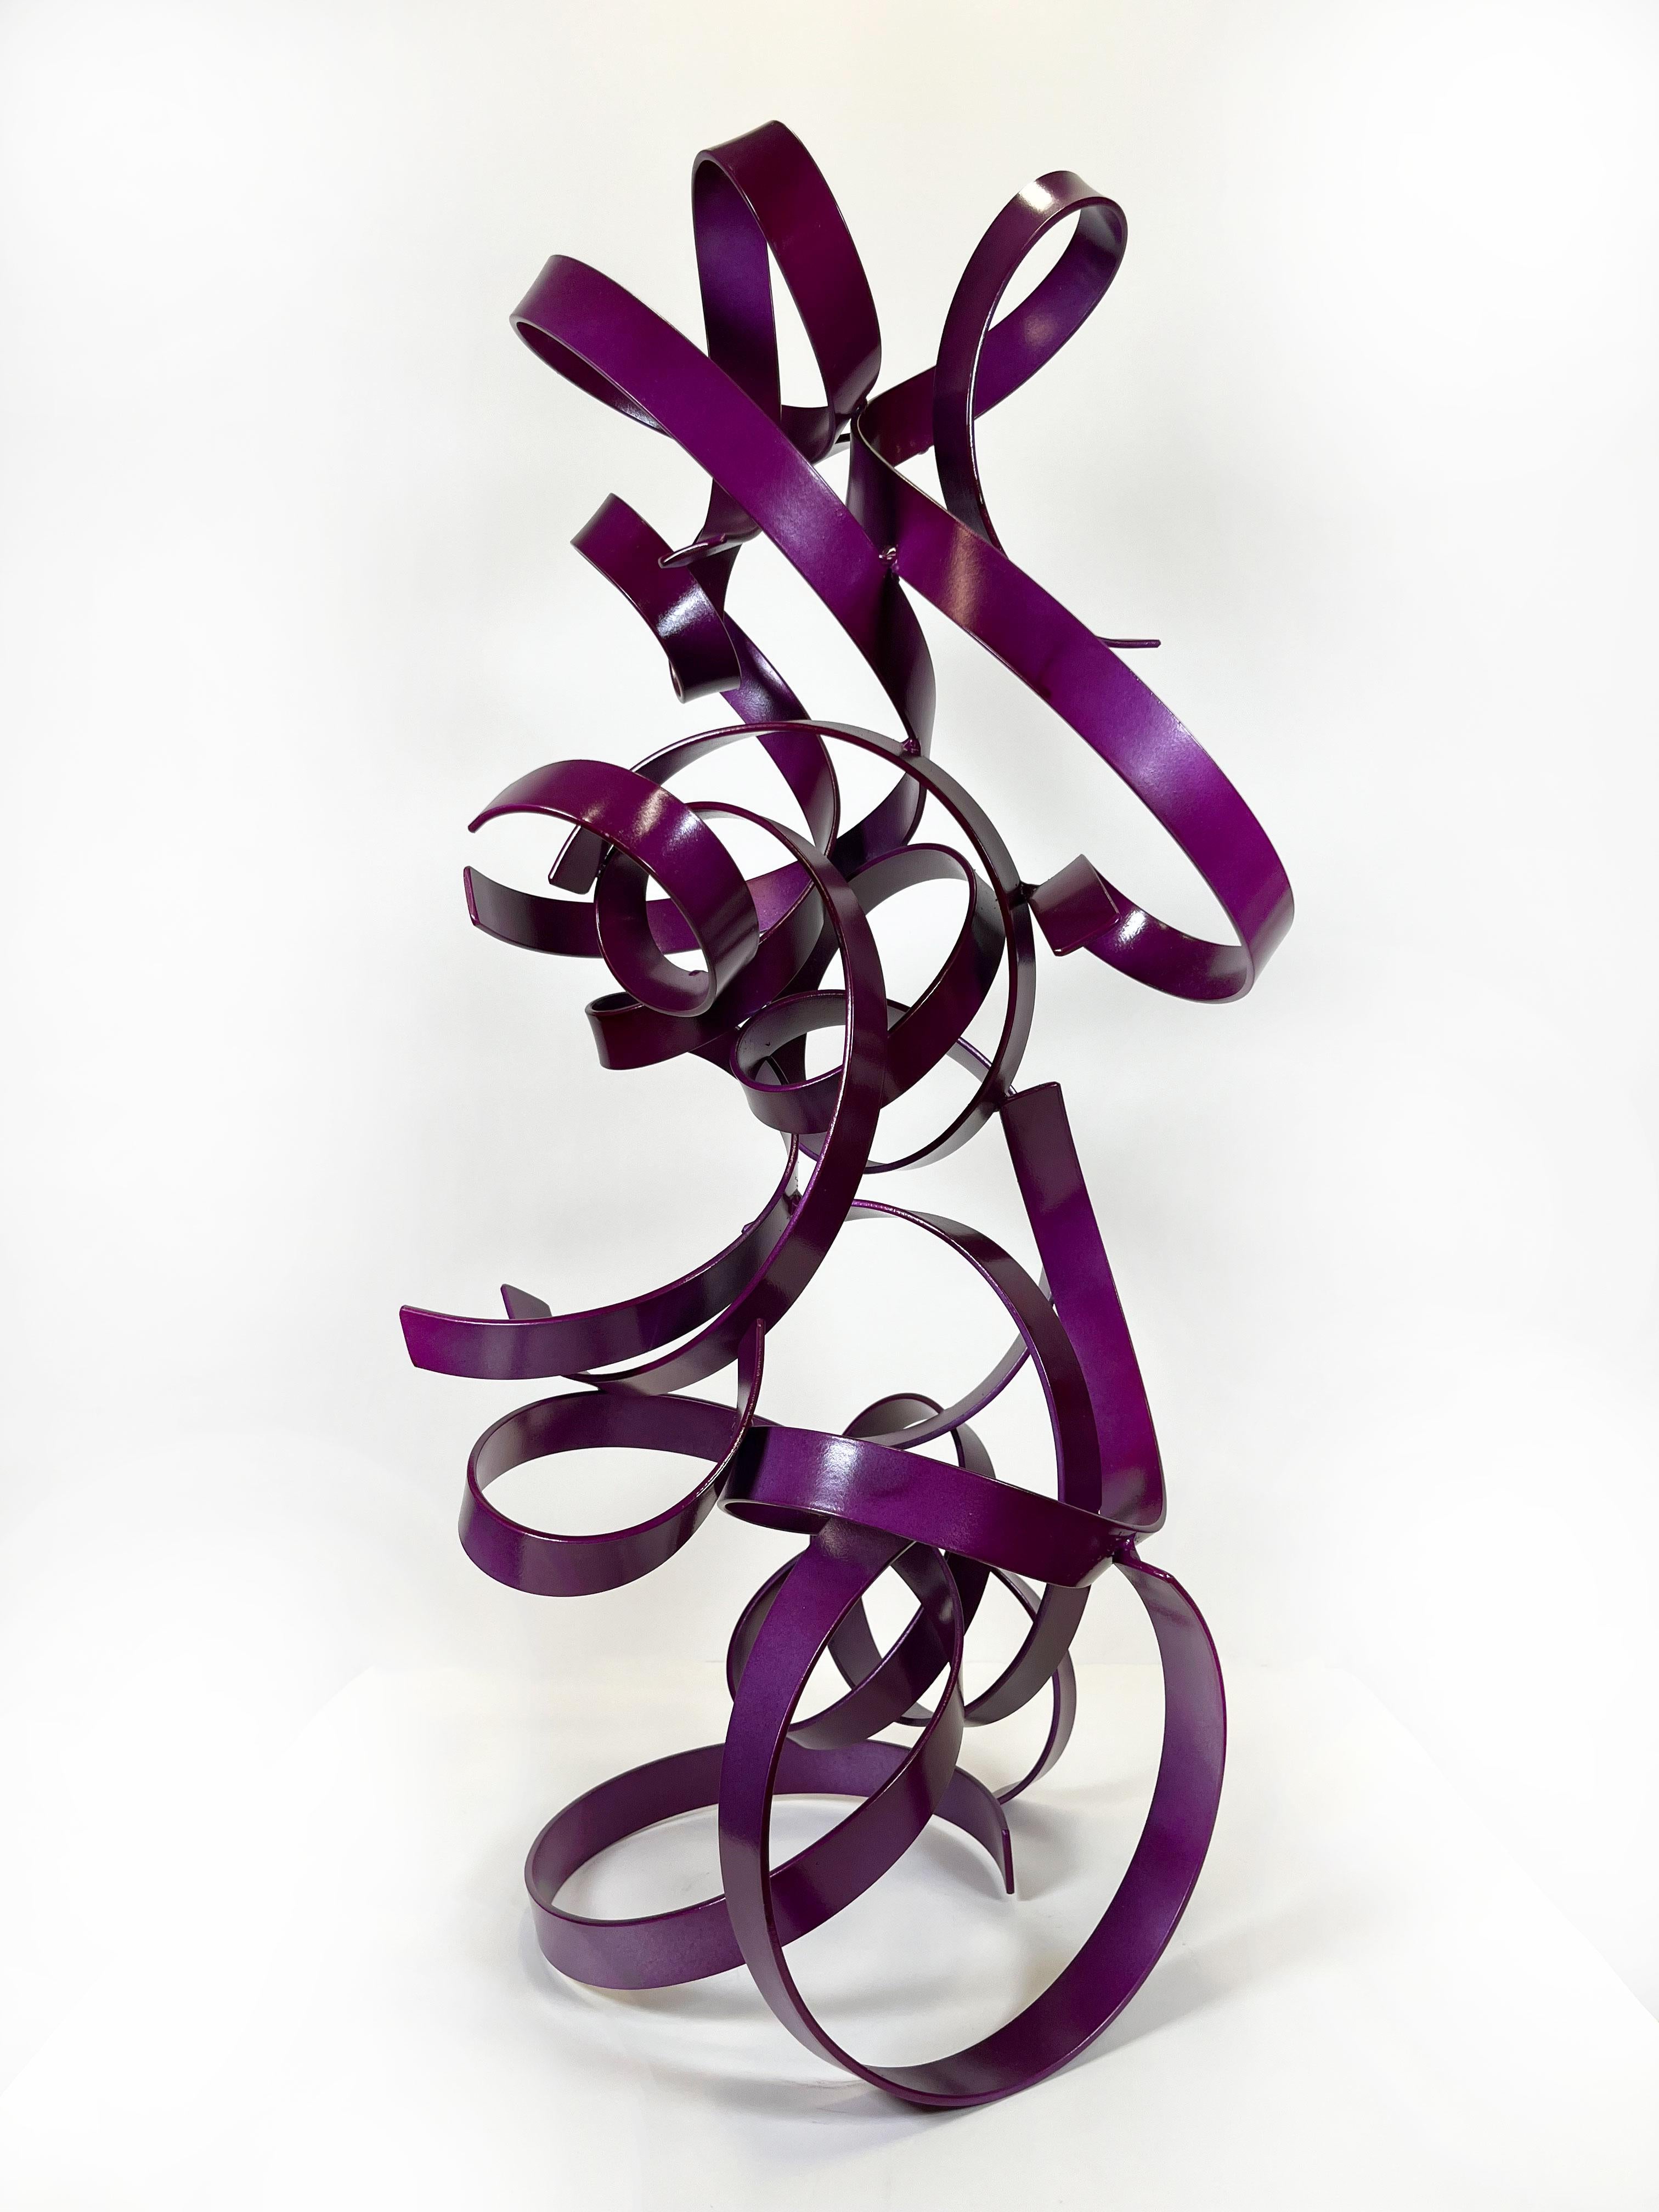 Beautiful Purple Chaos colorful metal 3D sculpture made of bent steel  - Art by Slavo Cech